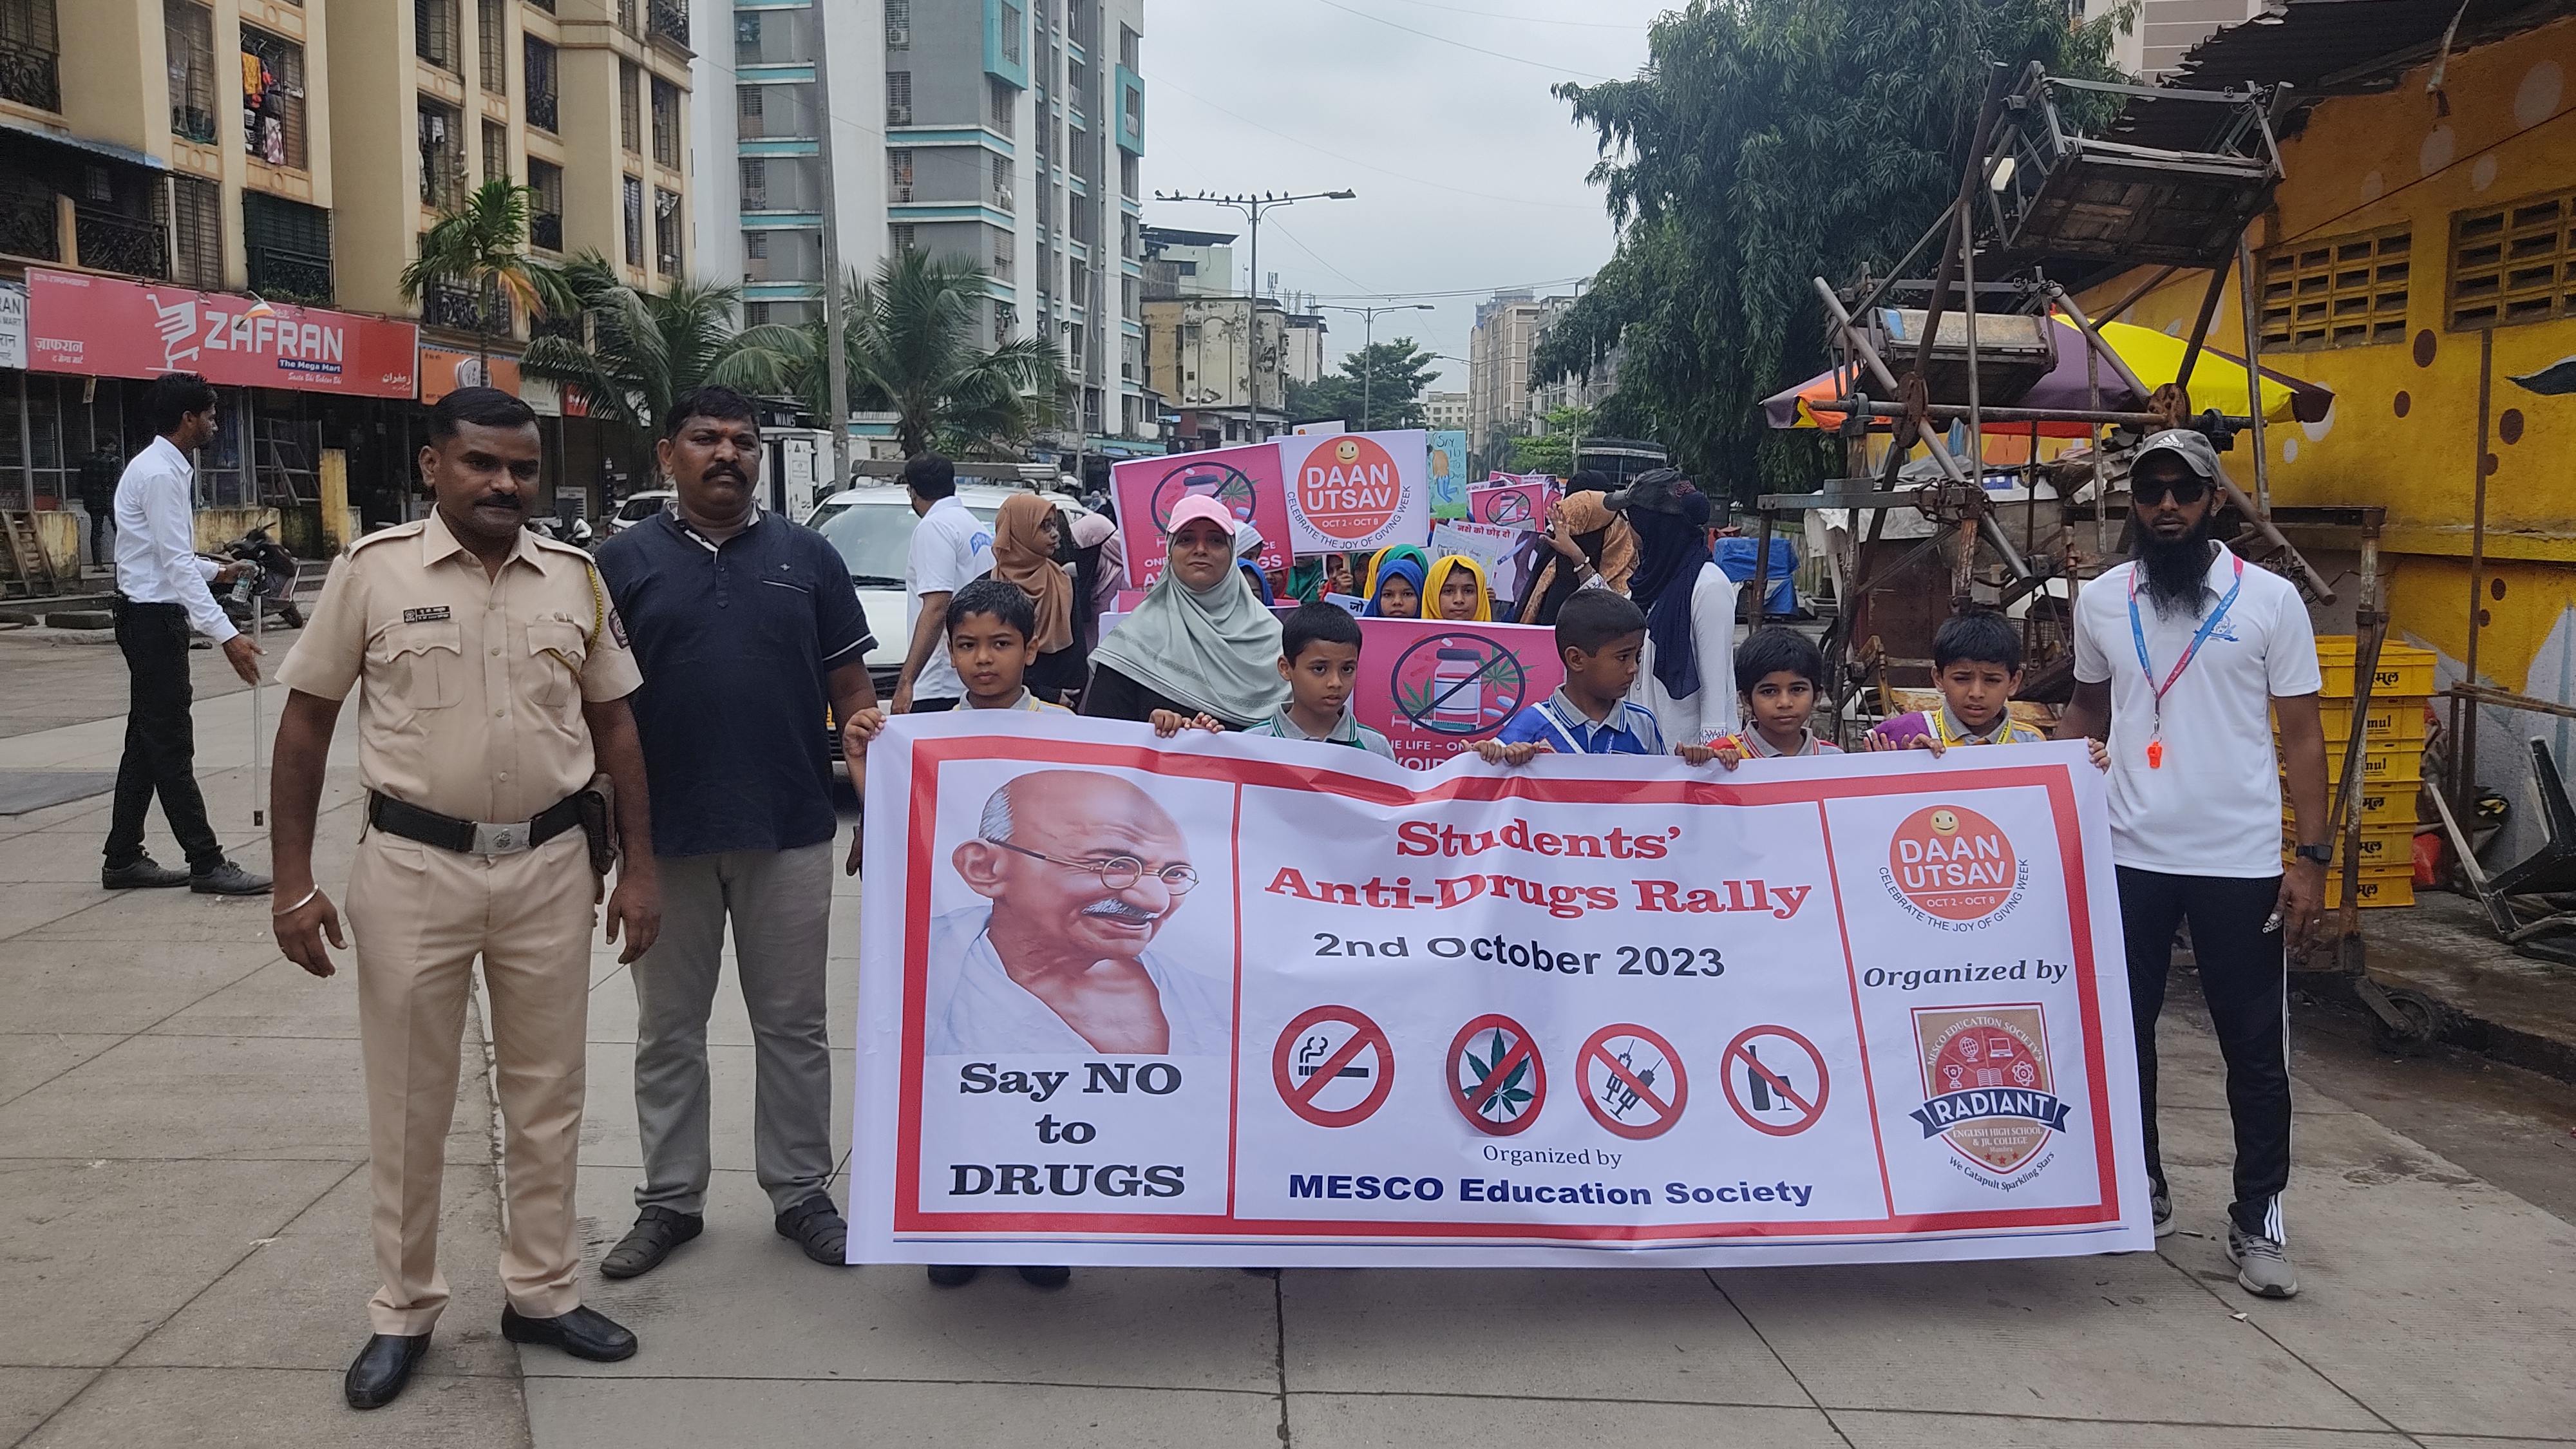 Students' Anti Drug Rally on 2nd October 2023